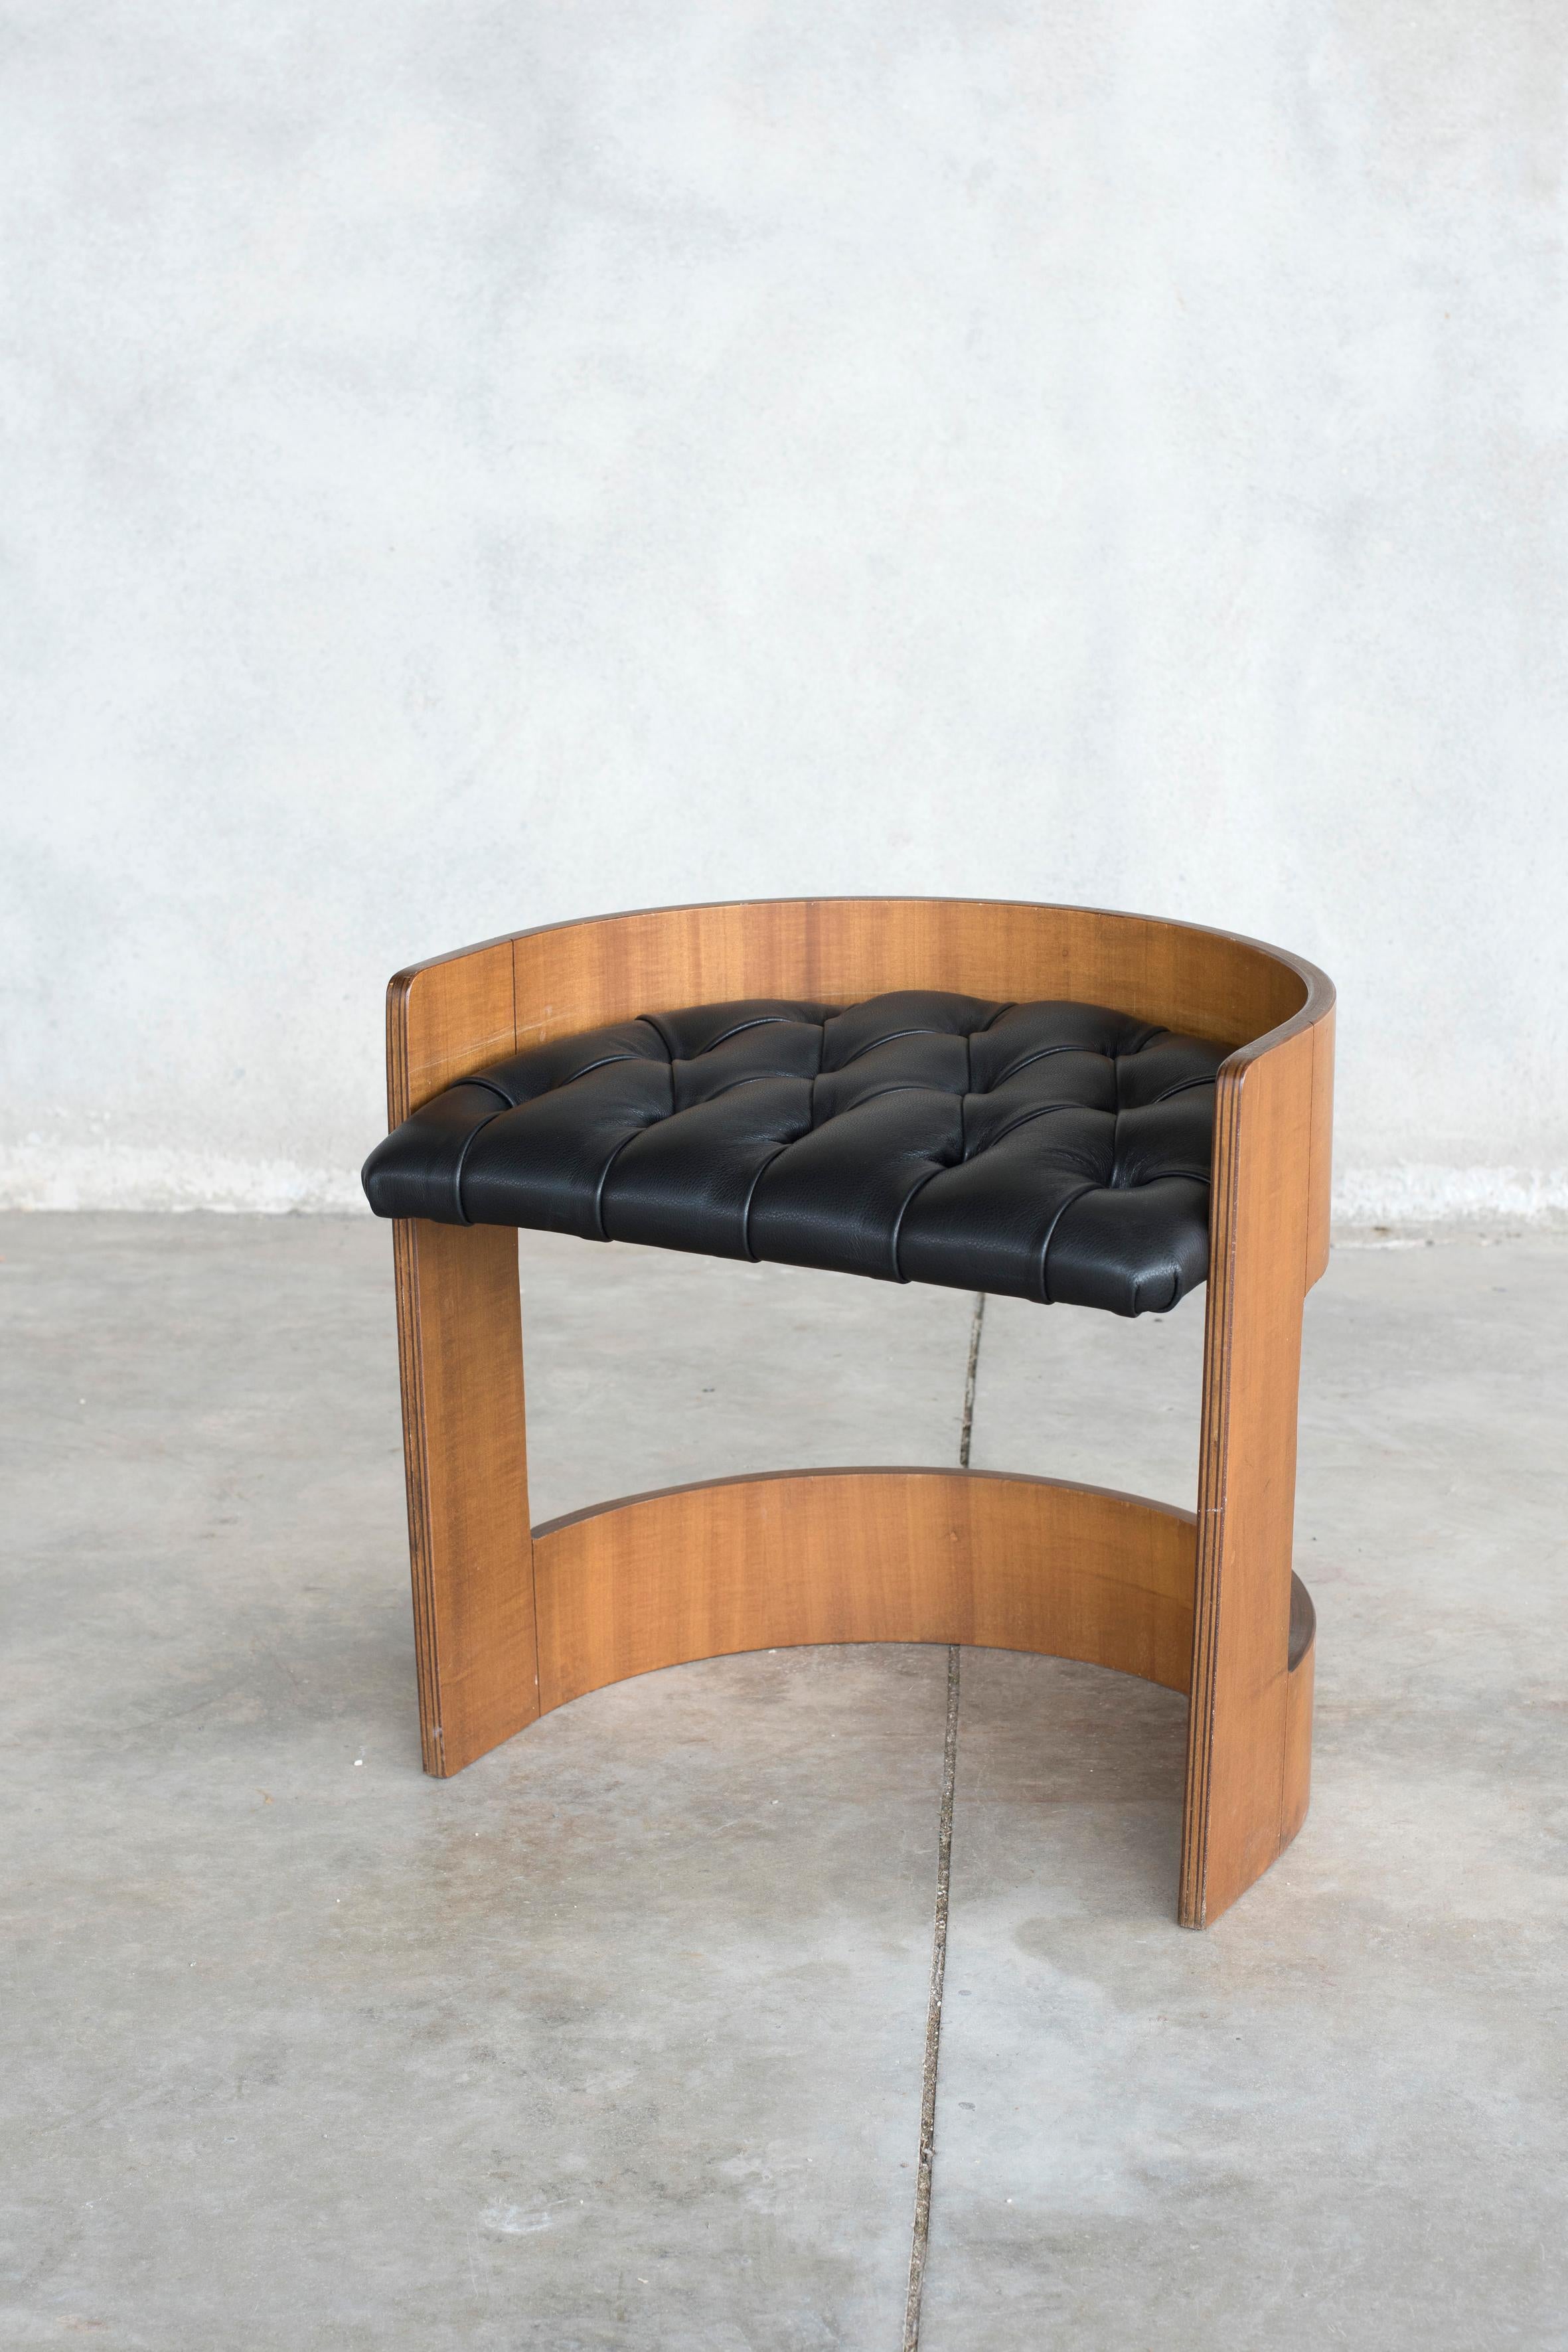 20th Century Curved Wood and Leather Seat Armchair